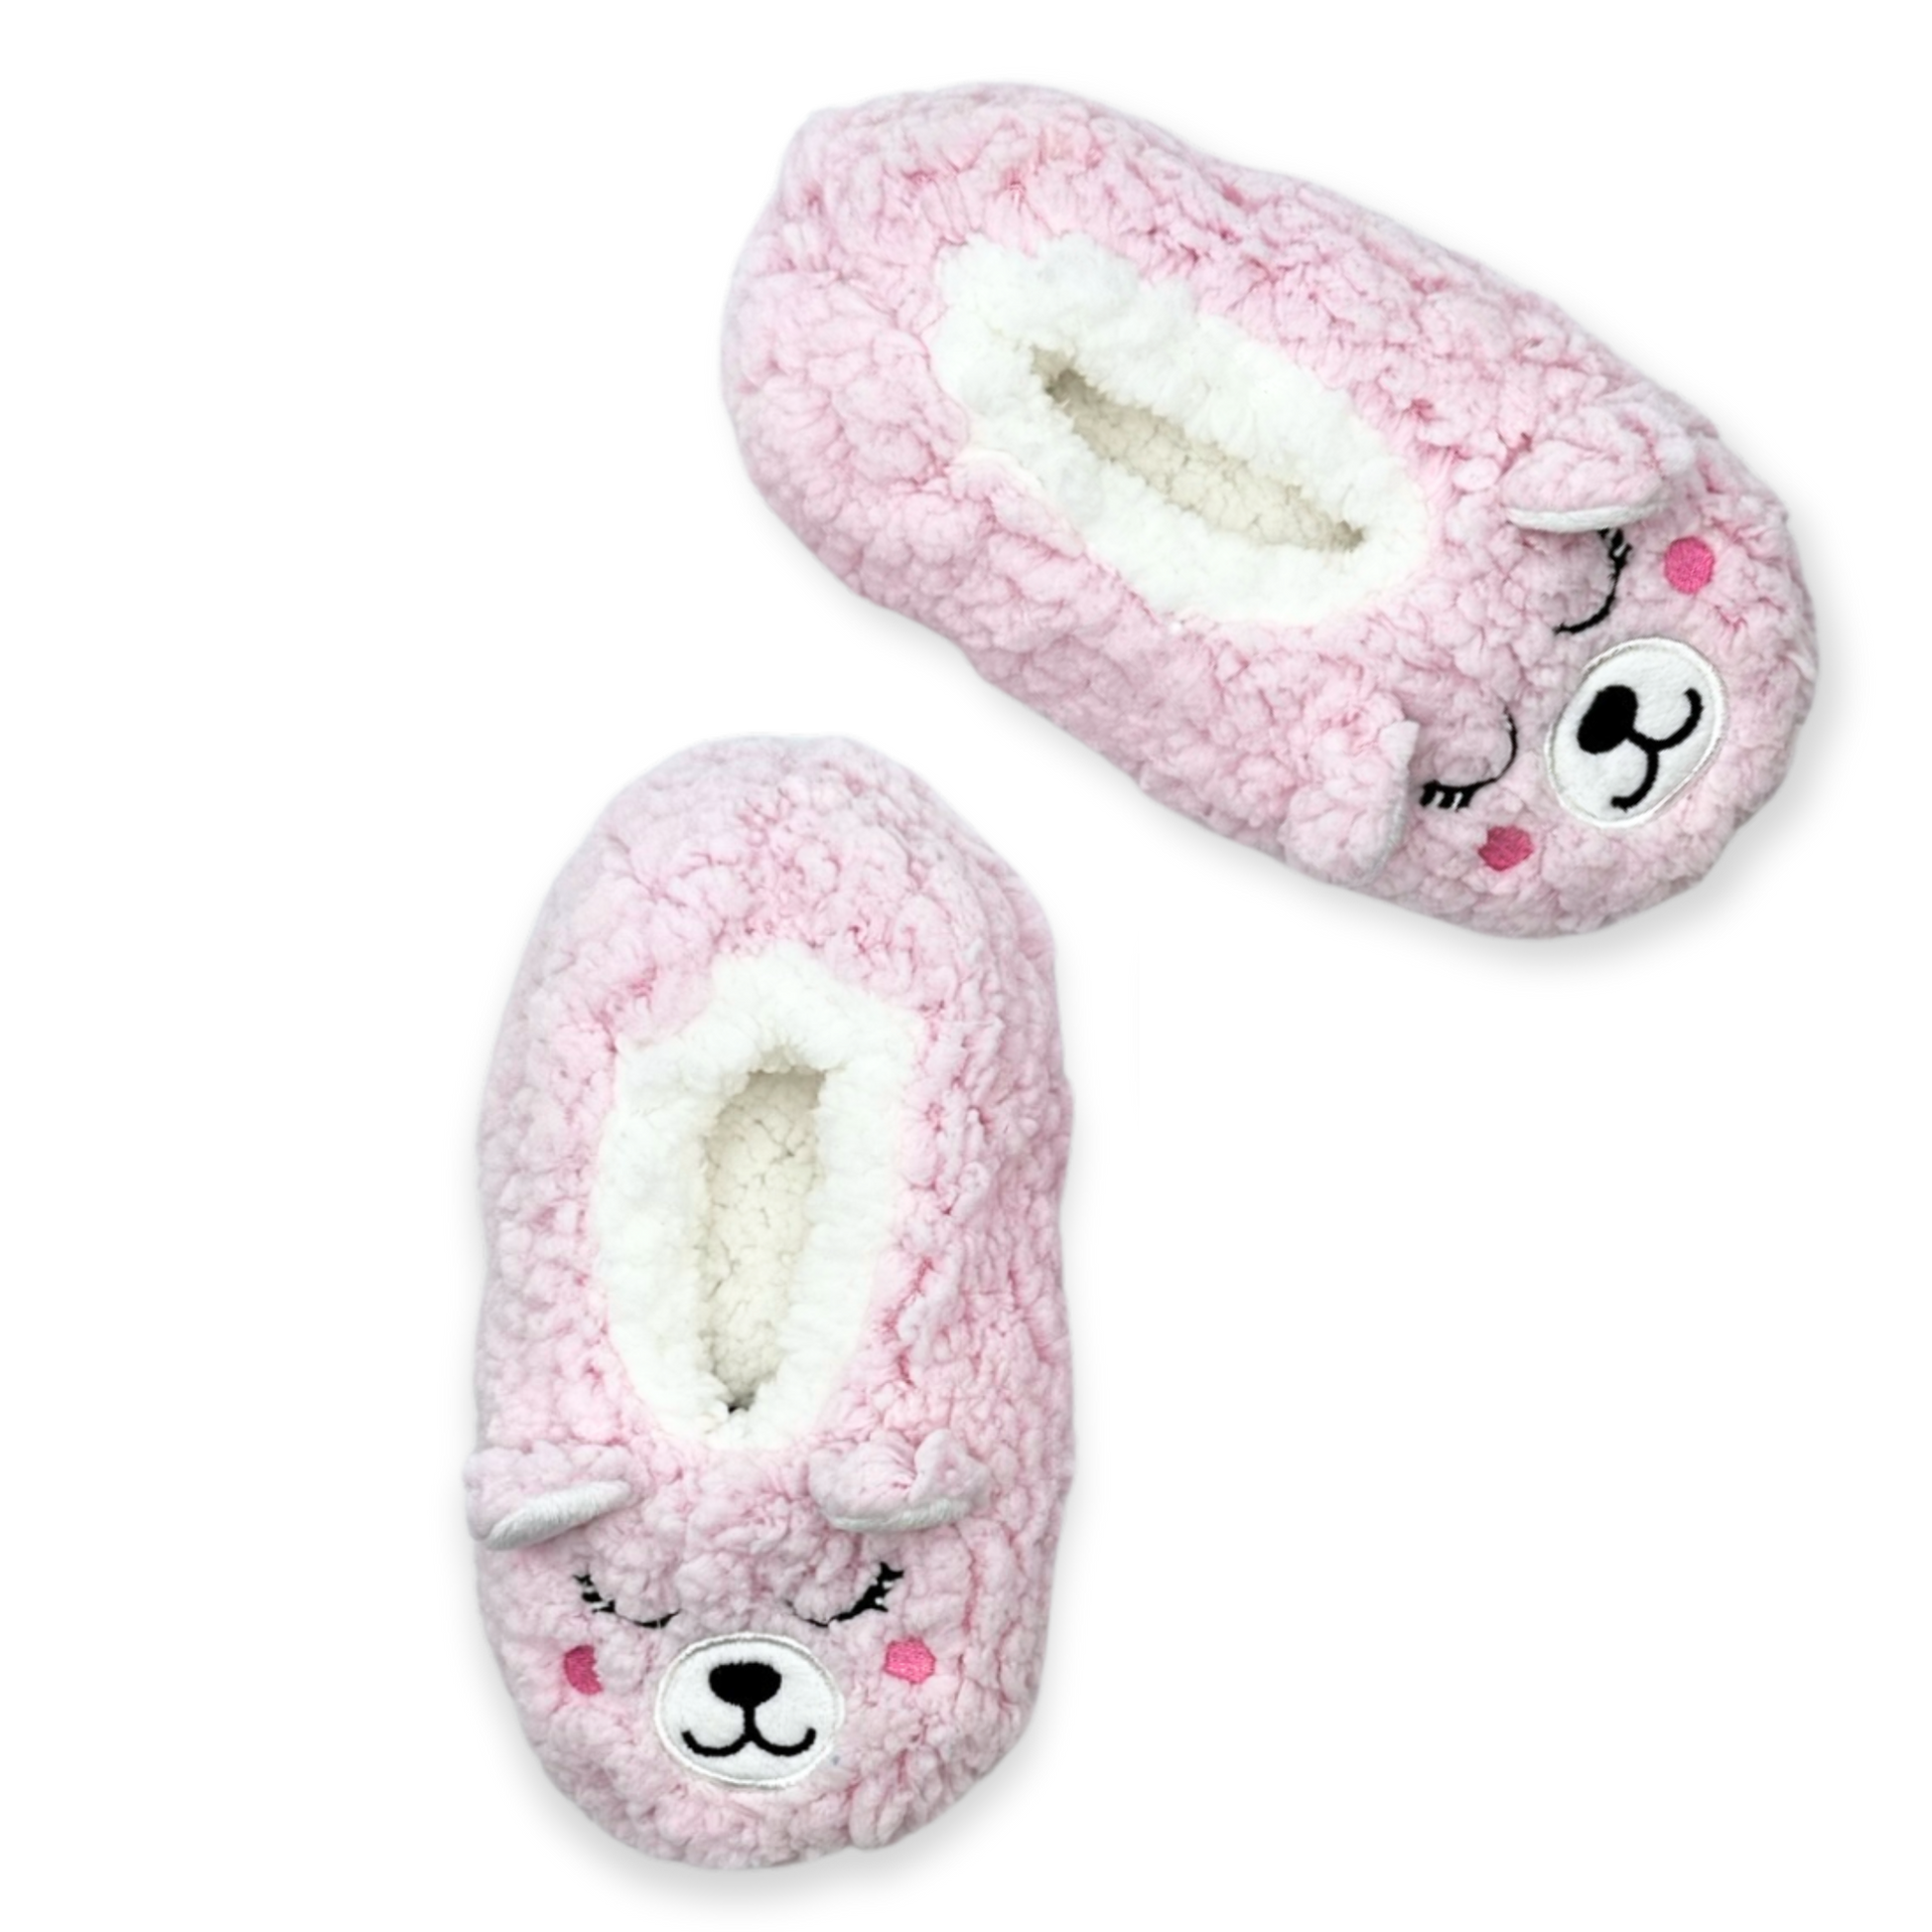  A pair of pink slippers with a bear face on them